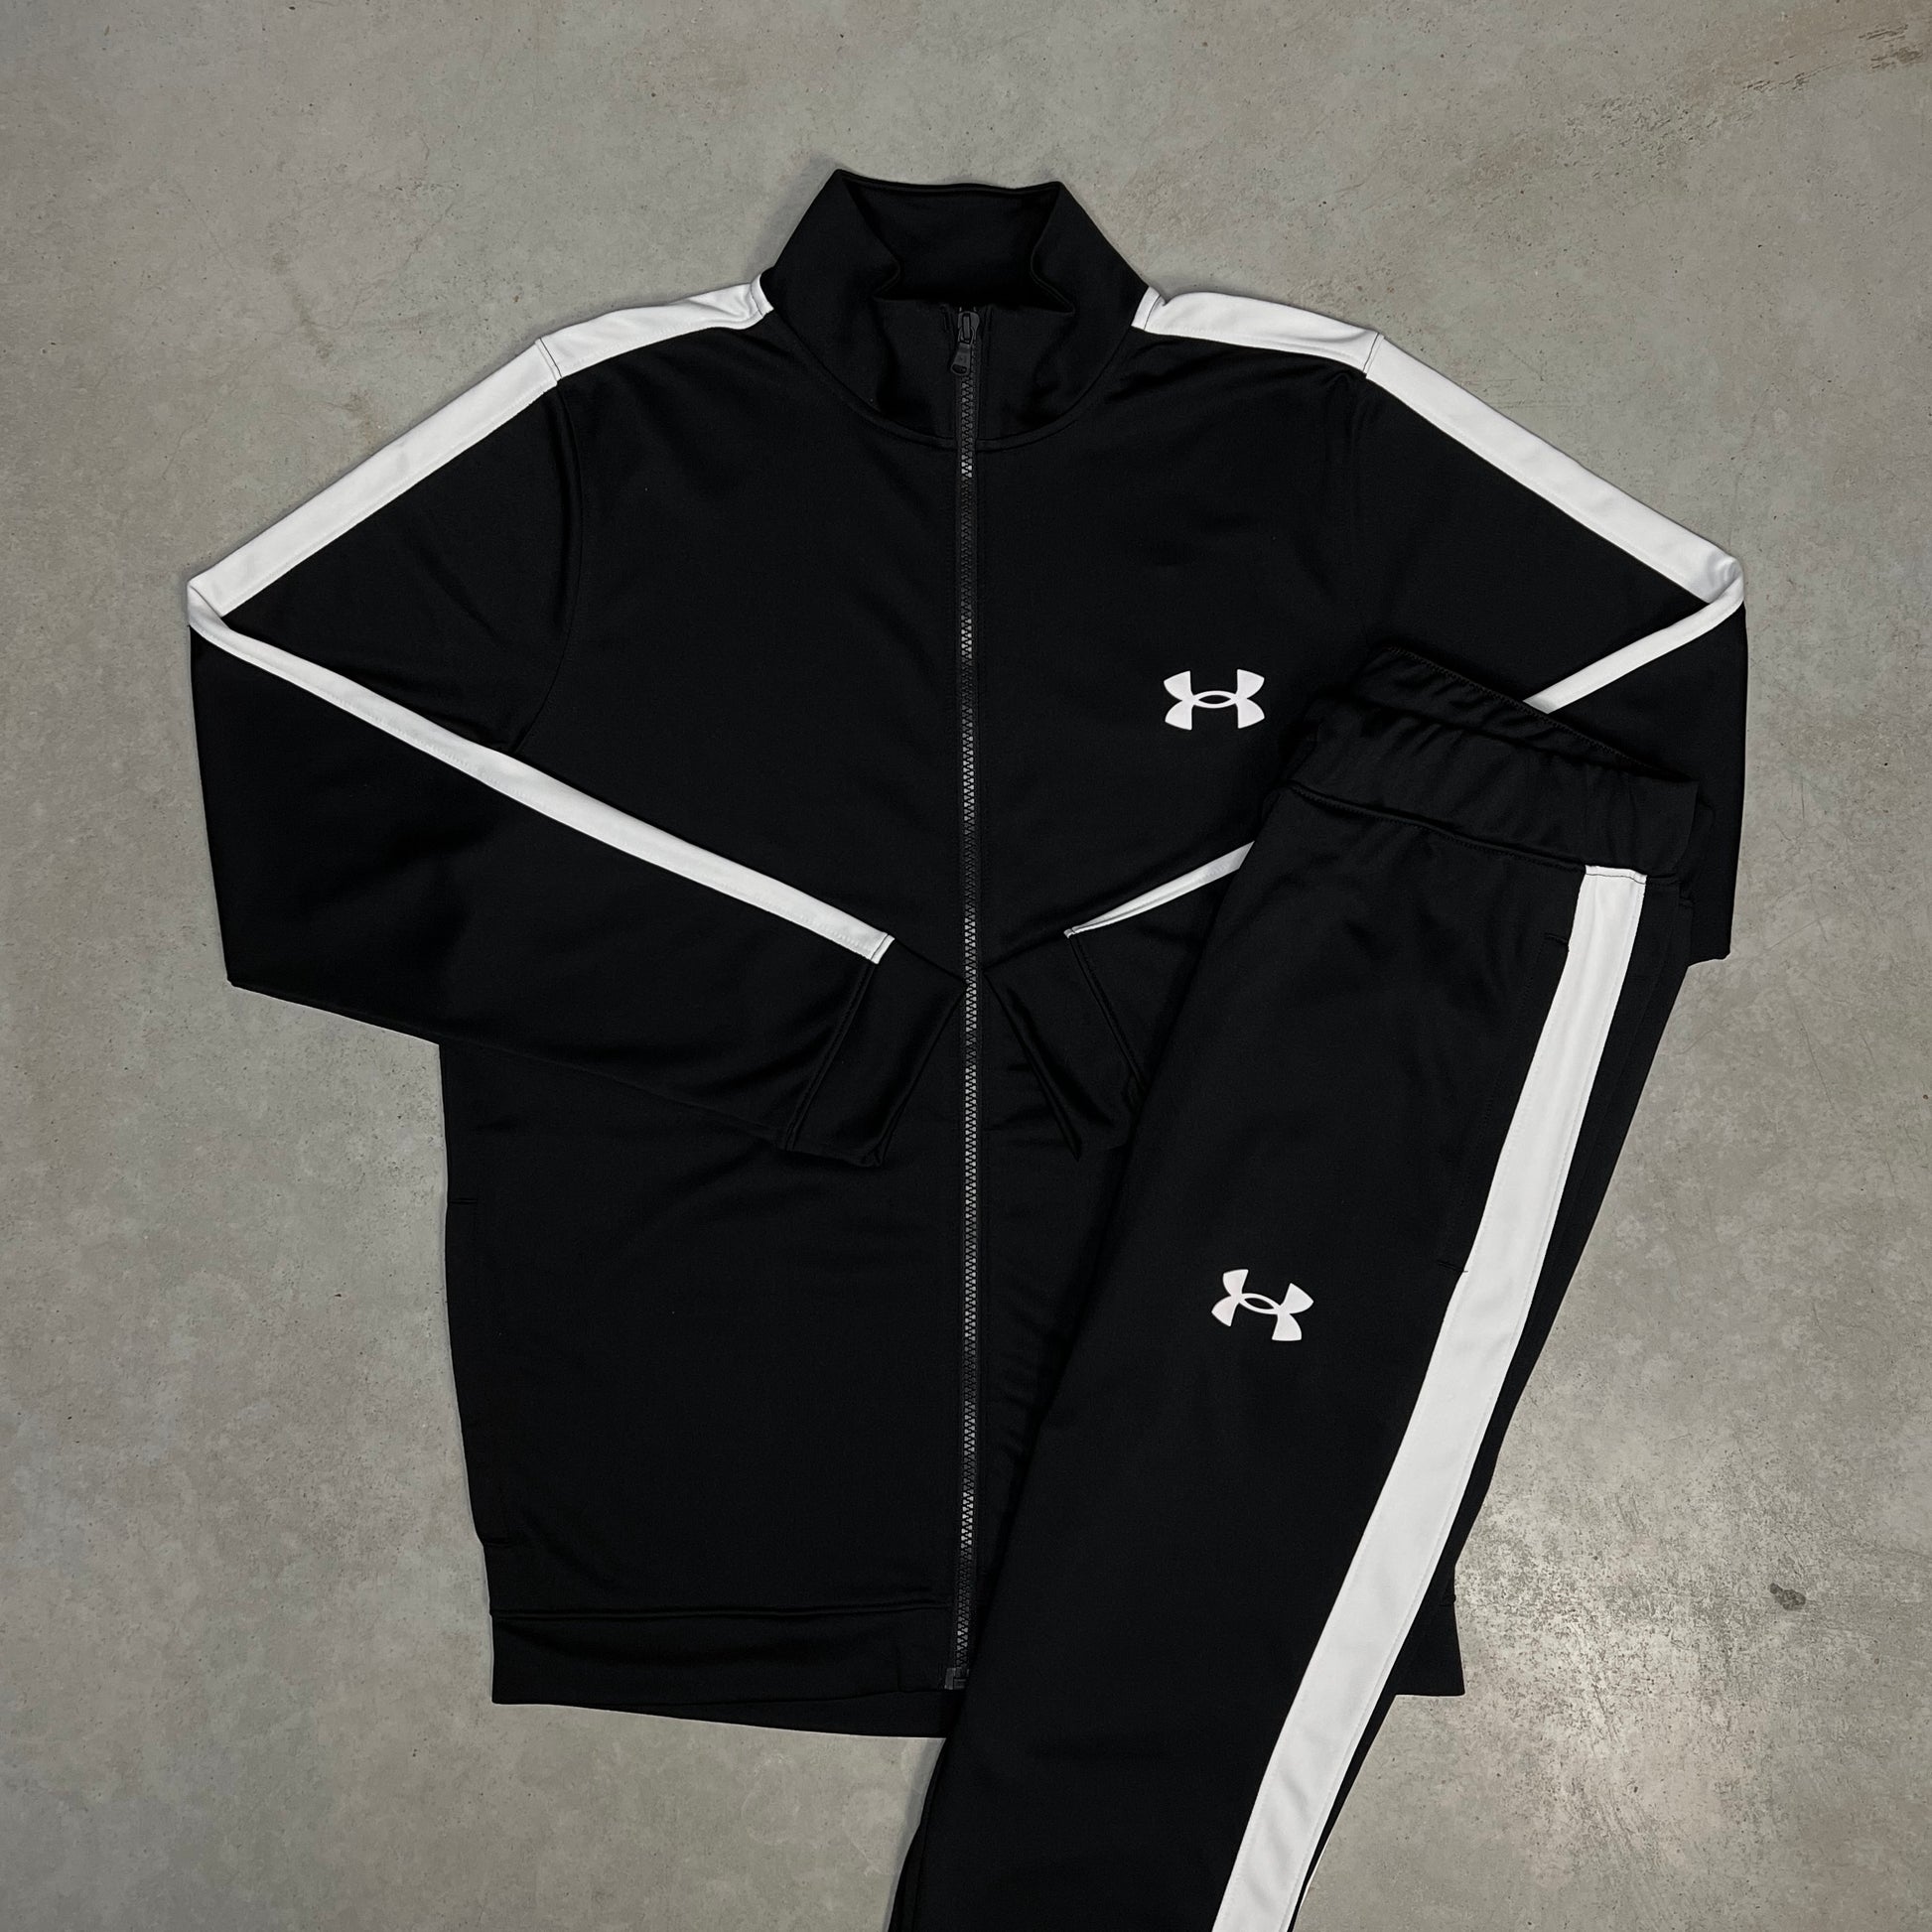 Armour – Tracksuit Black/White 24motions Under